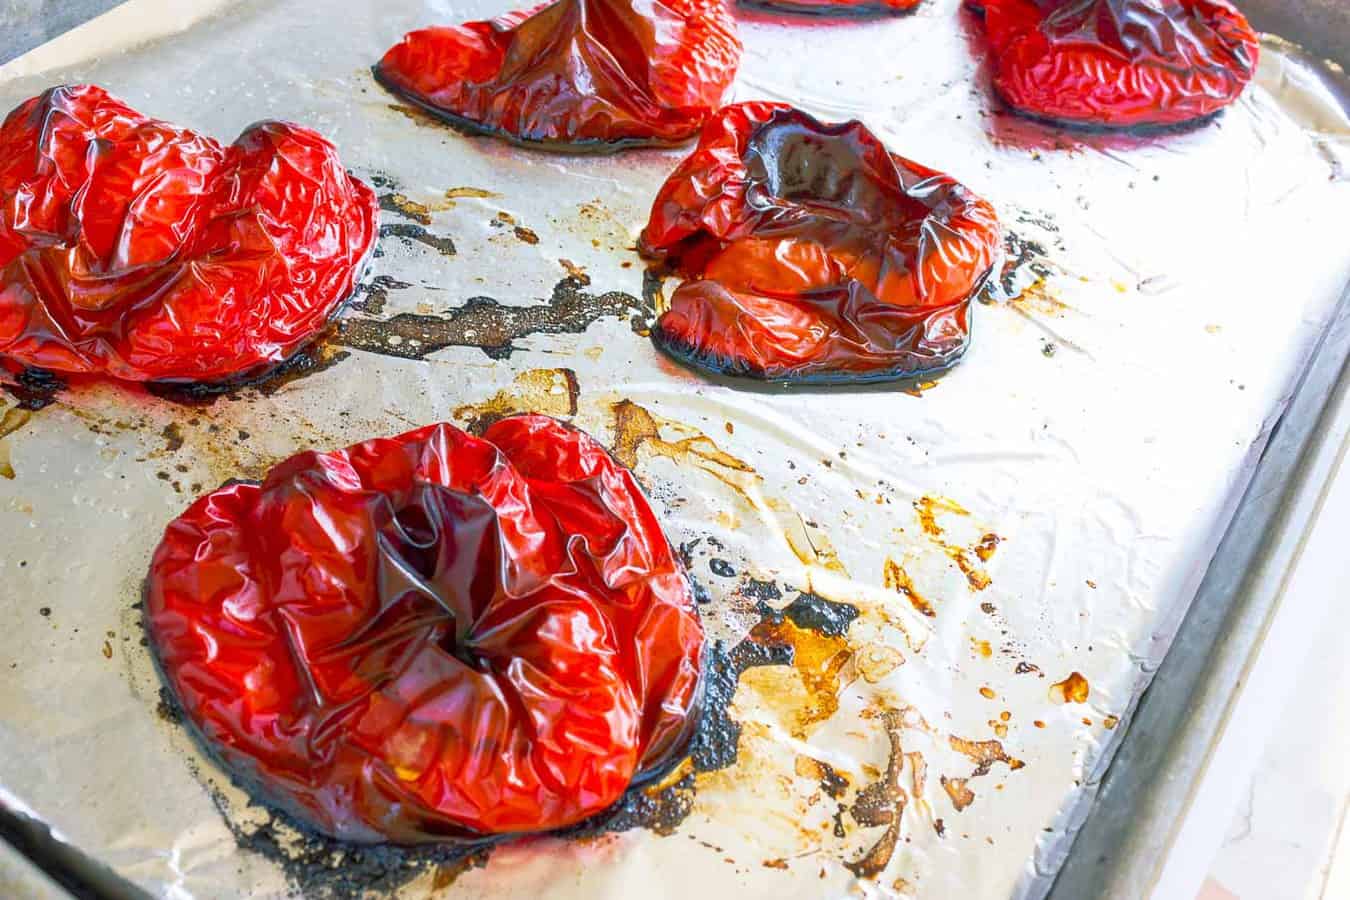 Roasted Red peppers cut side down on cookie sheet